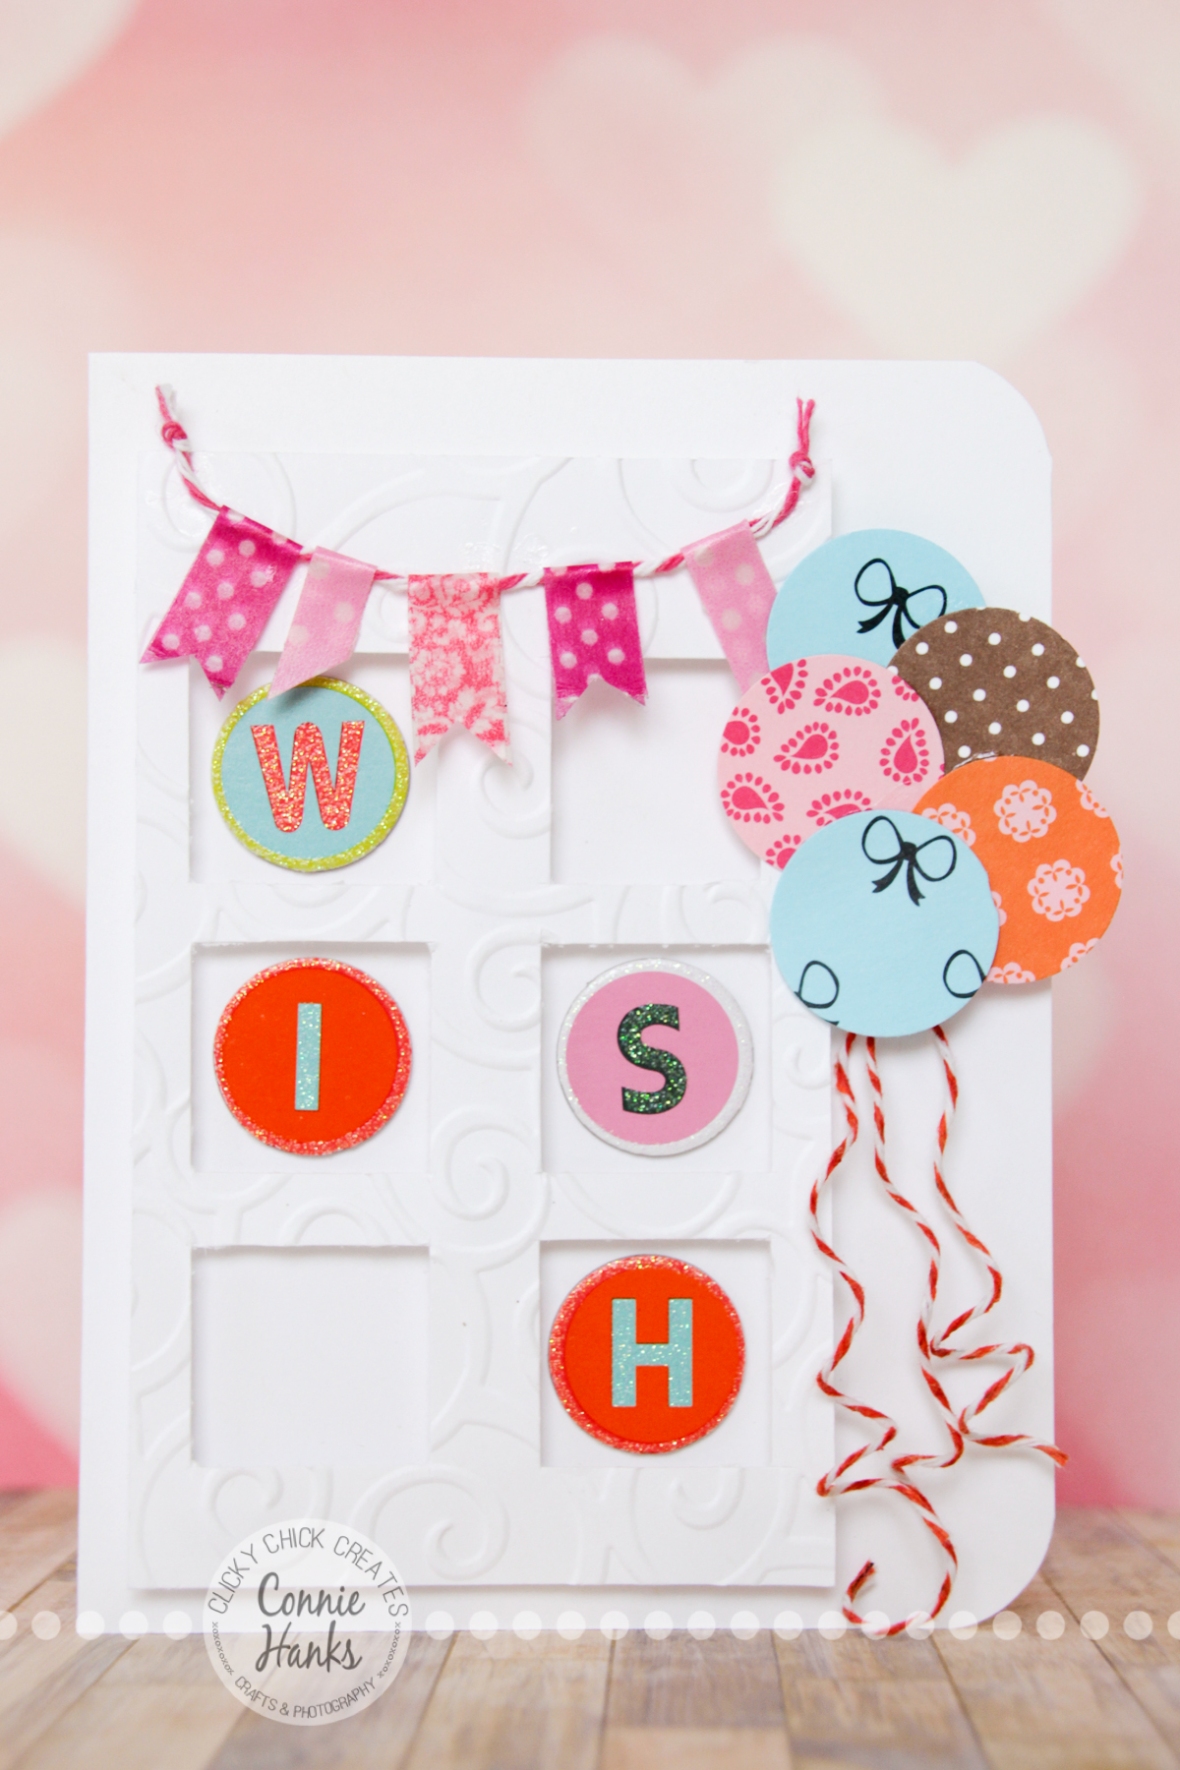 Connie Hanks Photography // ClickyChickCreates.com // WISH birthday card, door, banner, balloons, entry, fusion, challenge